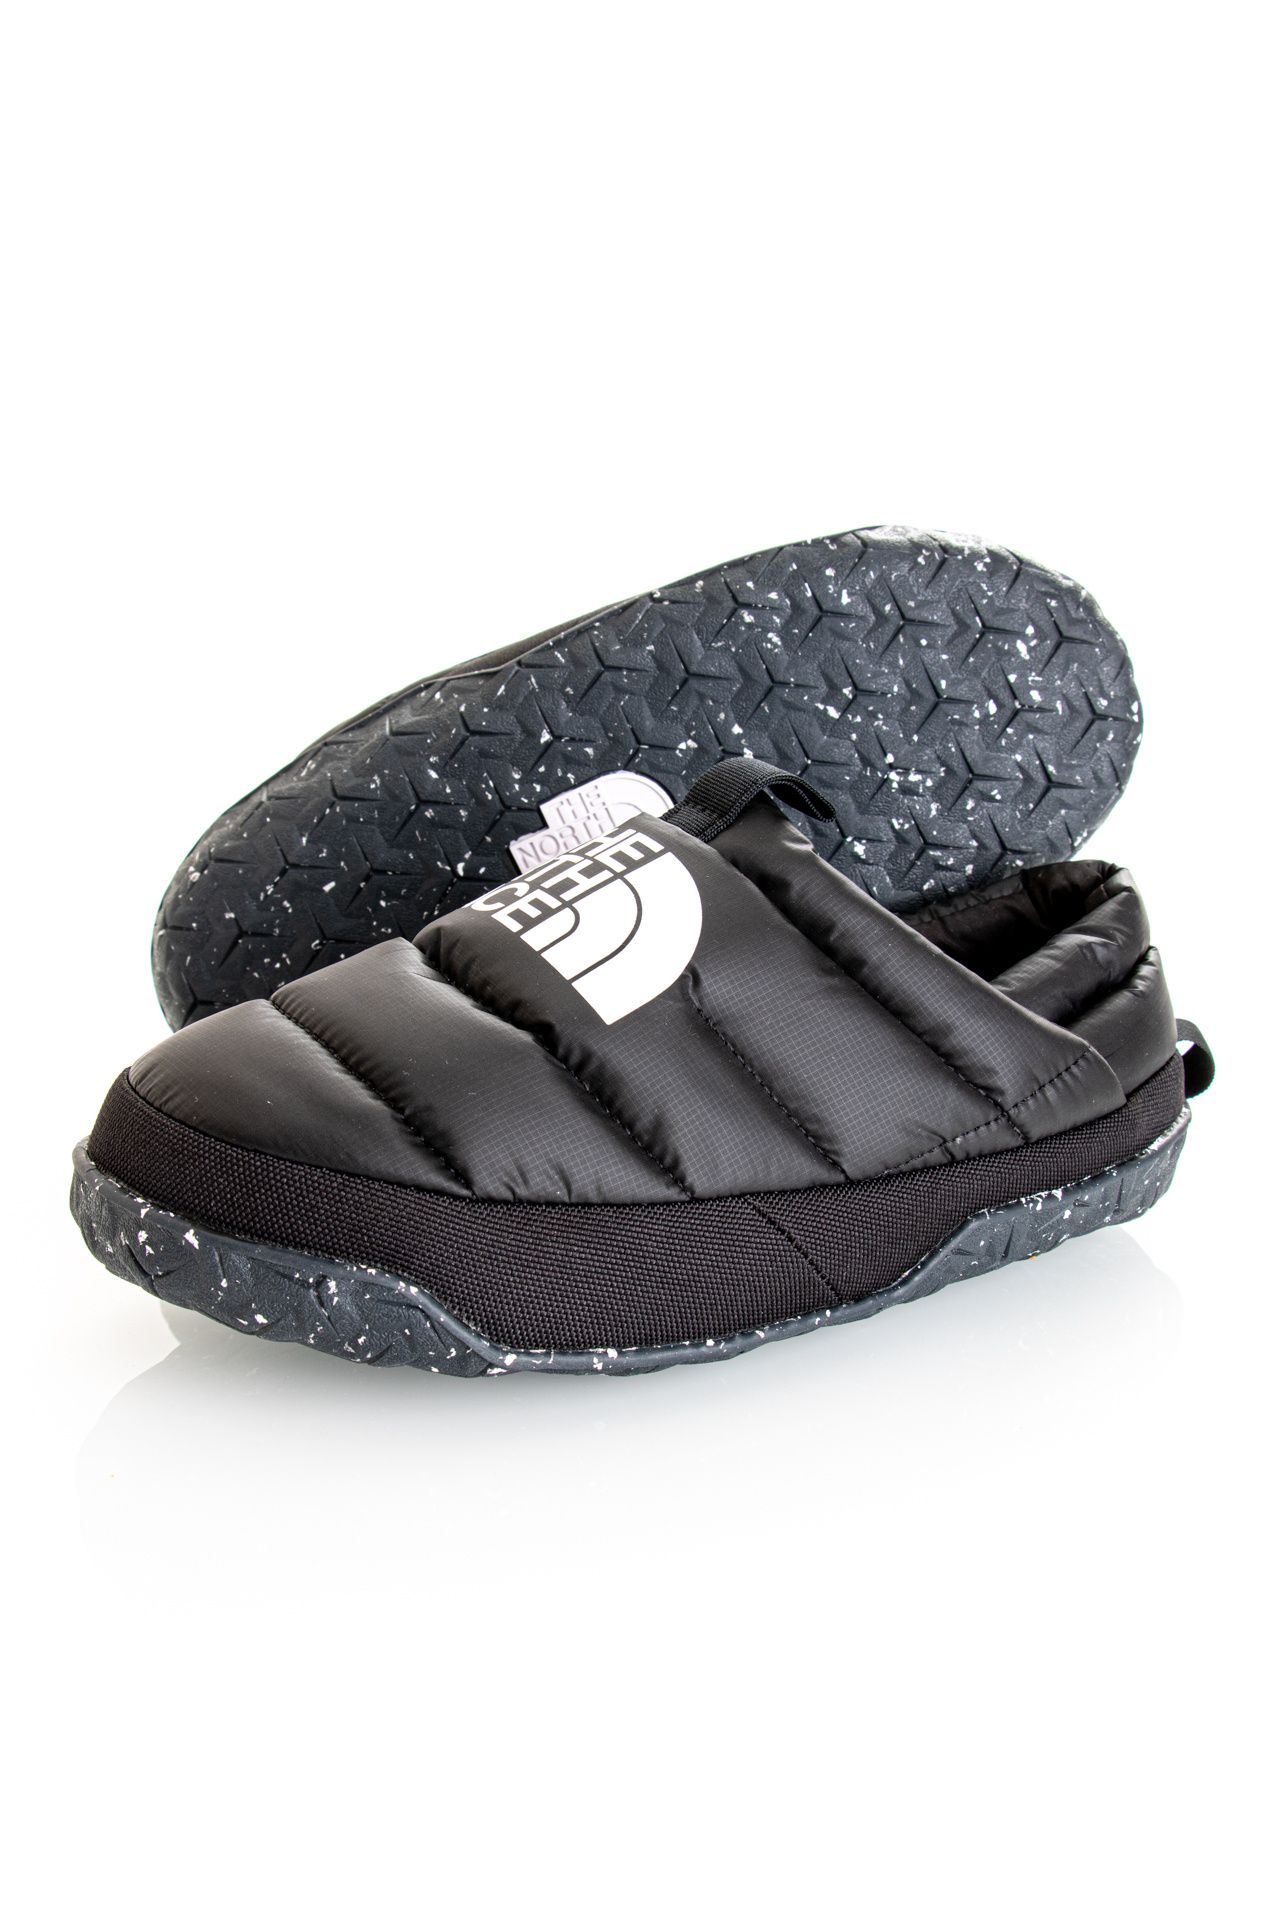 Afbeelding van The North Face Pantoffels TNF M NUPTSE MULE TNF BLACK/TNF WHITE NF0A5G2FKY4